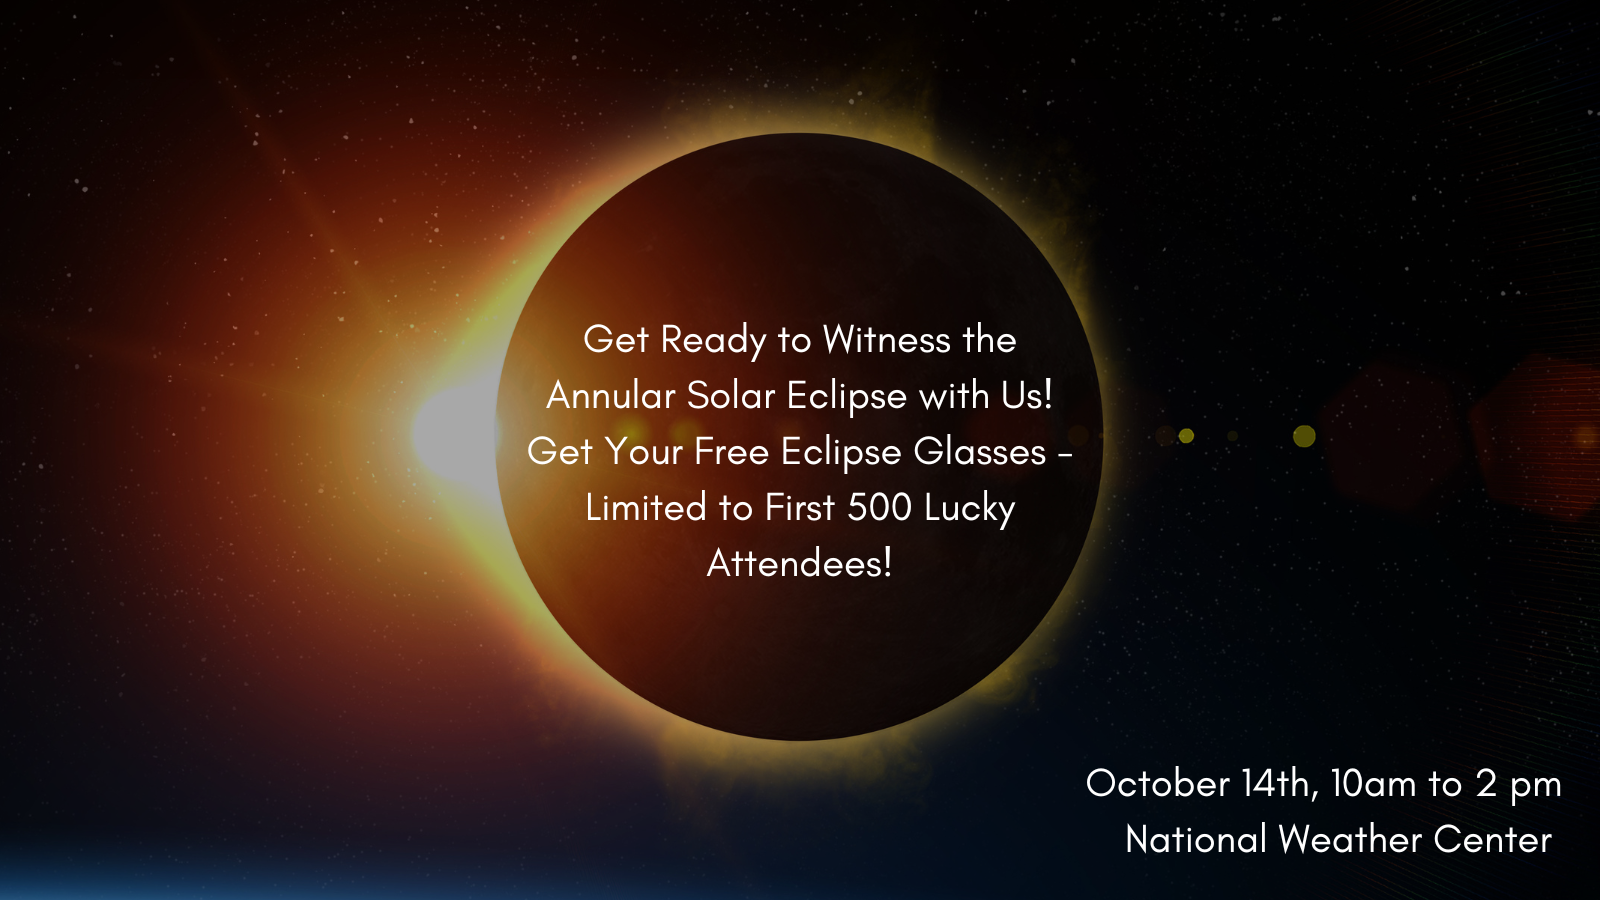 An annular solar eclipse with text inside the eclipse "Get Ready to Witness the Annular Solar Eclipse with Us! Get Your Free Eclipse Glasses - Limited to First 500 Lucky Attendees!" with additional text located at the lower right "October 14th, 10am to 2 pm National Weather Center." 